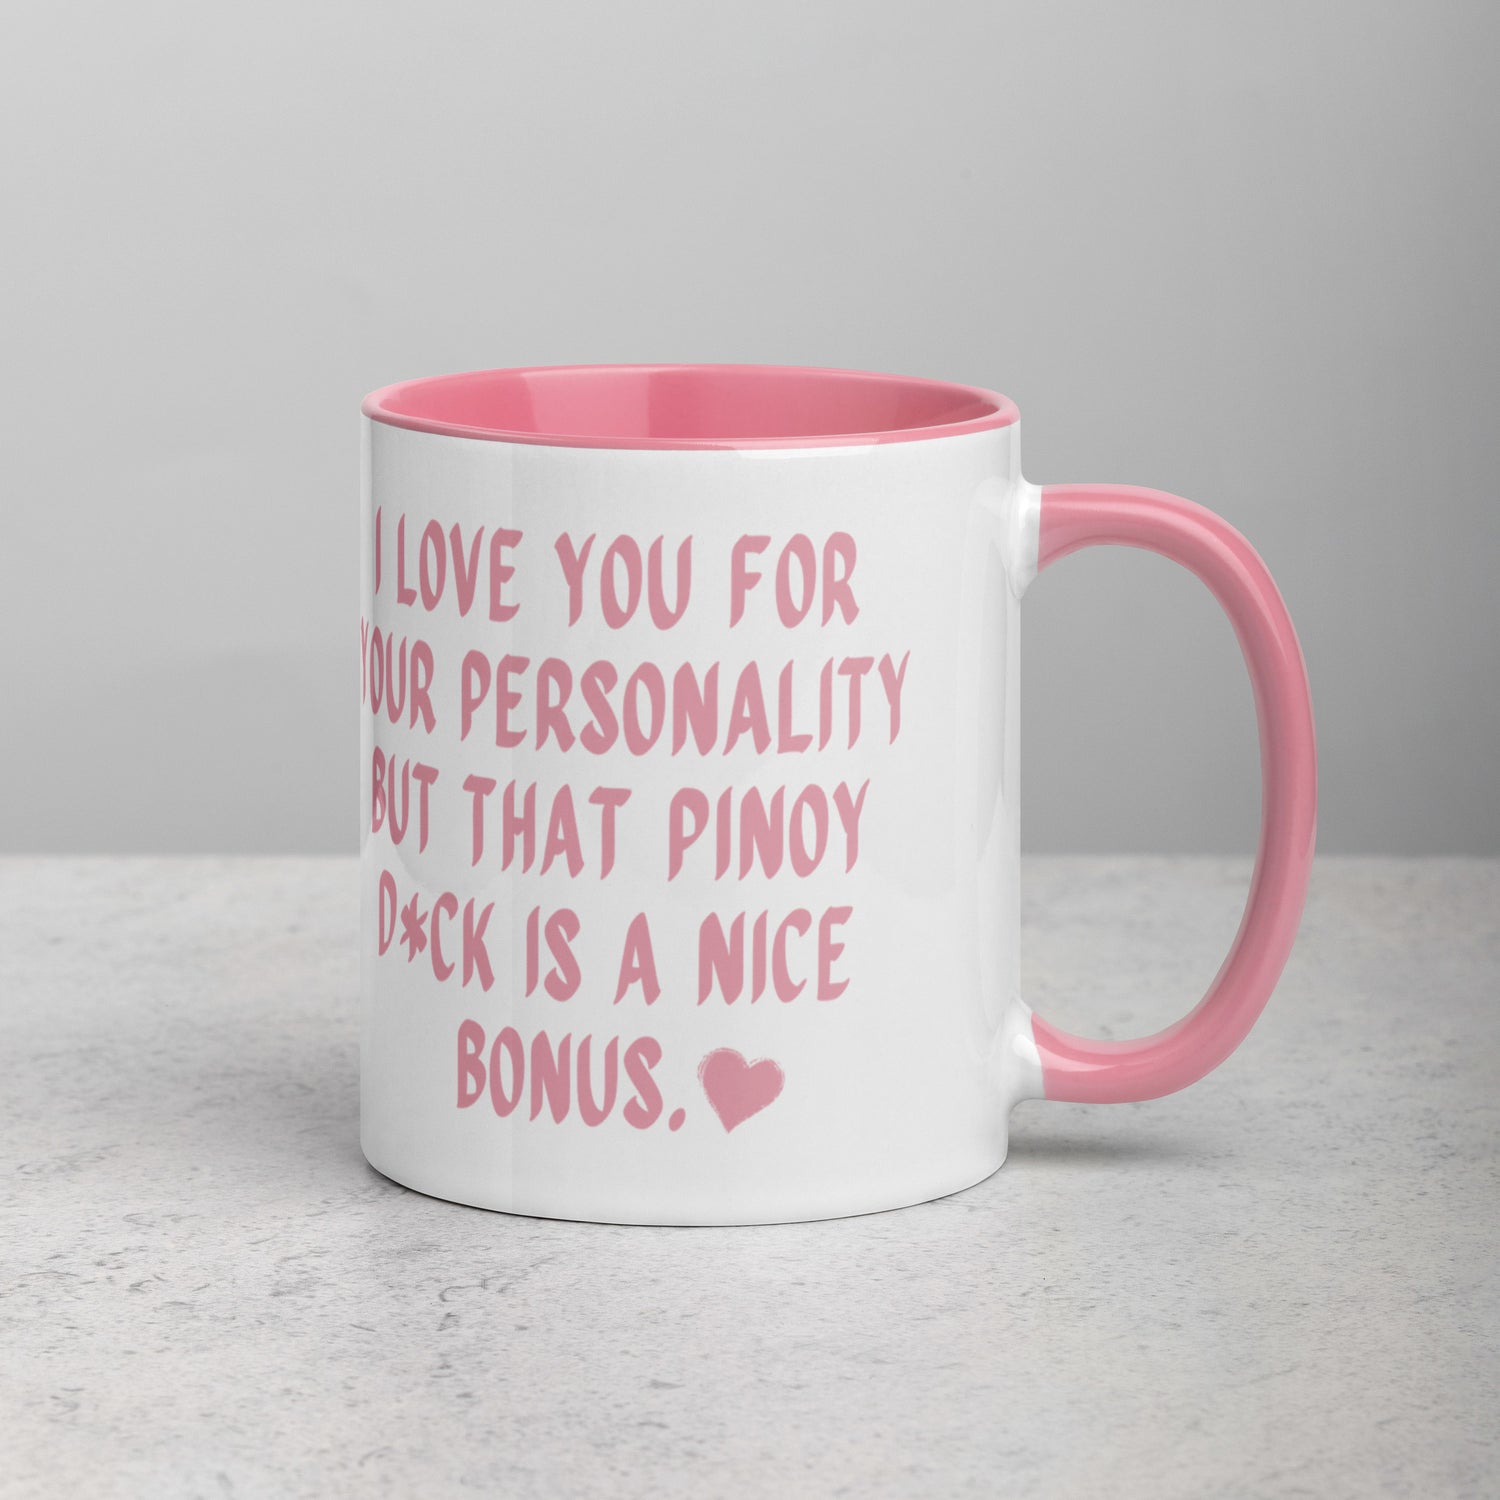 I Love You For Your Personality Funny Pinoy Valentine's Day Mug in color variant Pink.